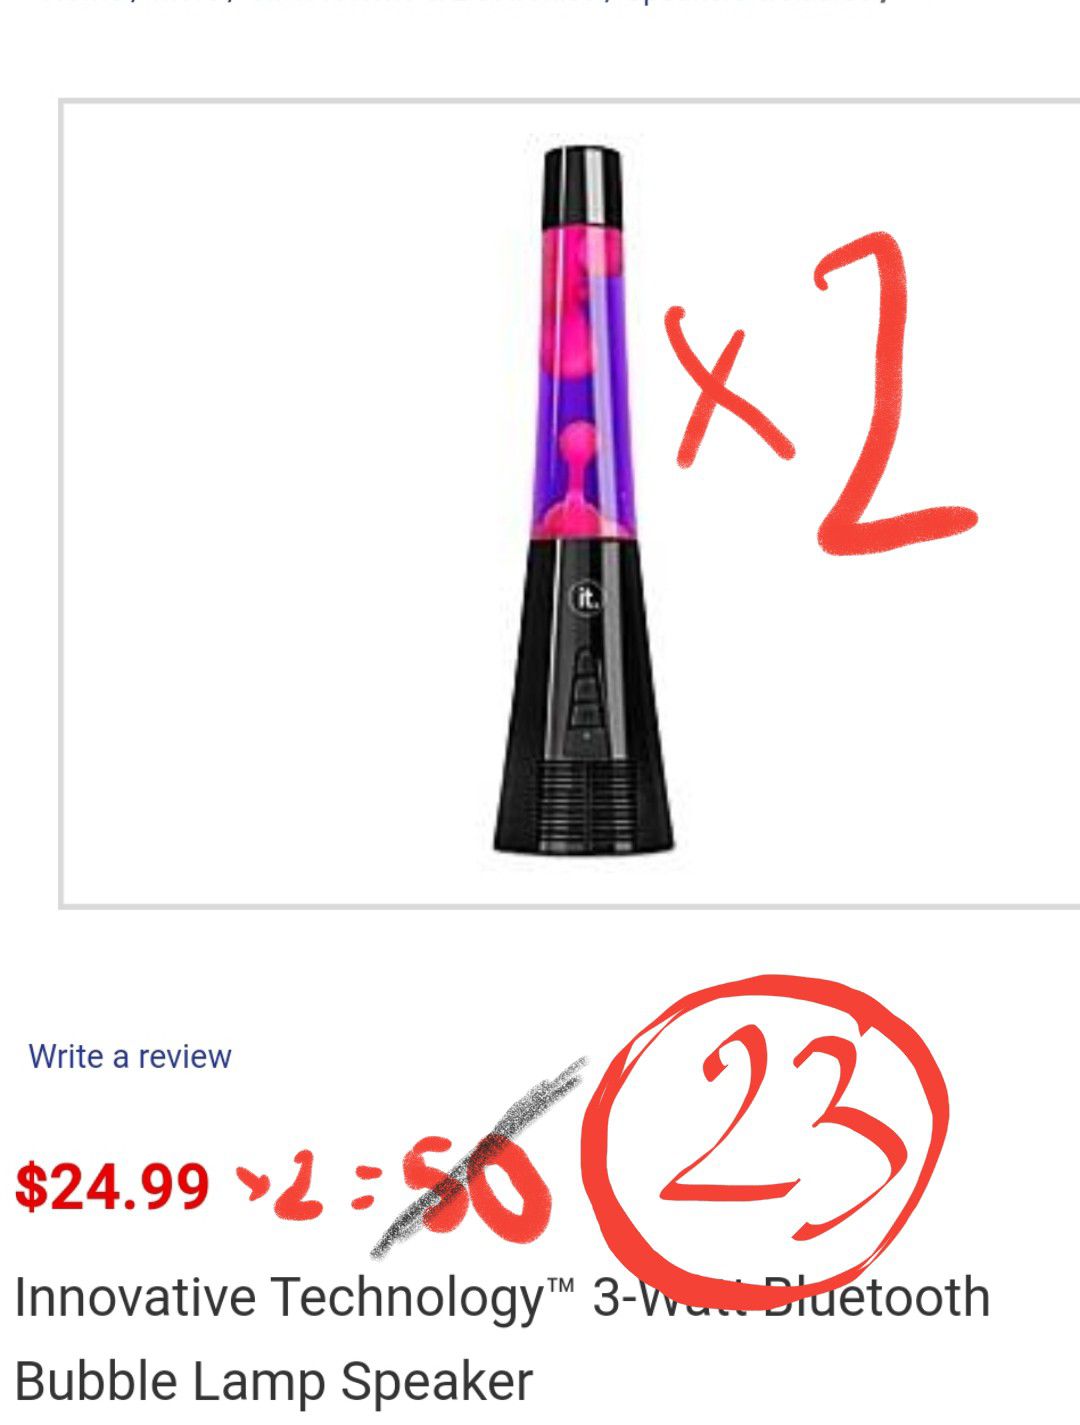 Two lava lamp with Bluetooth speakers